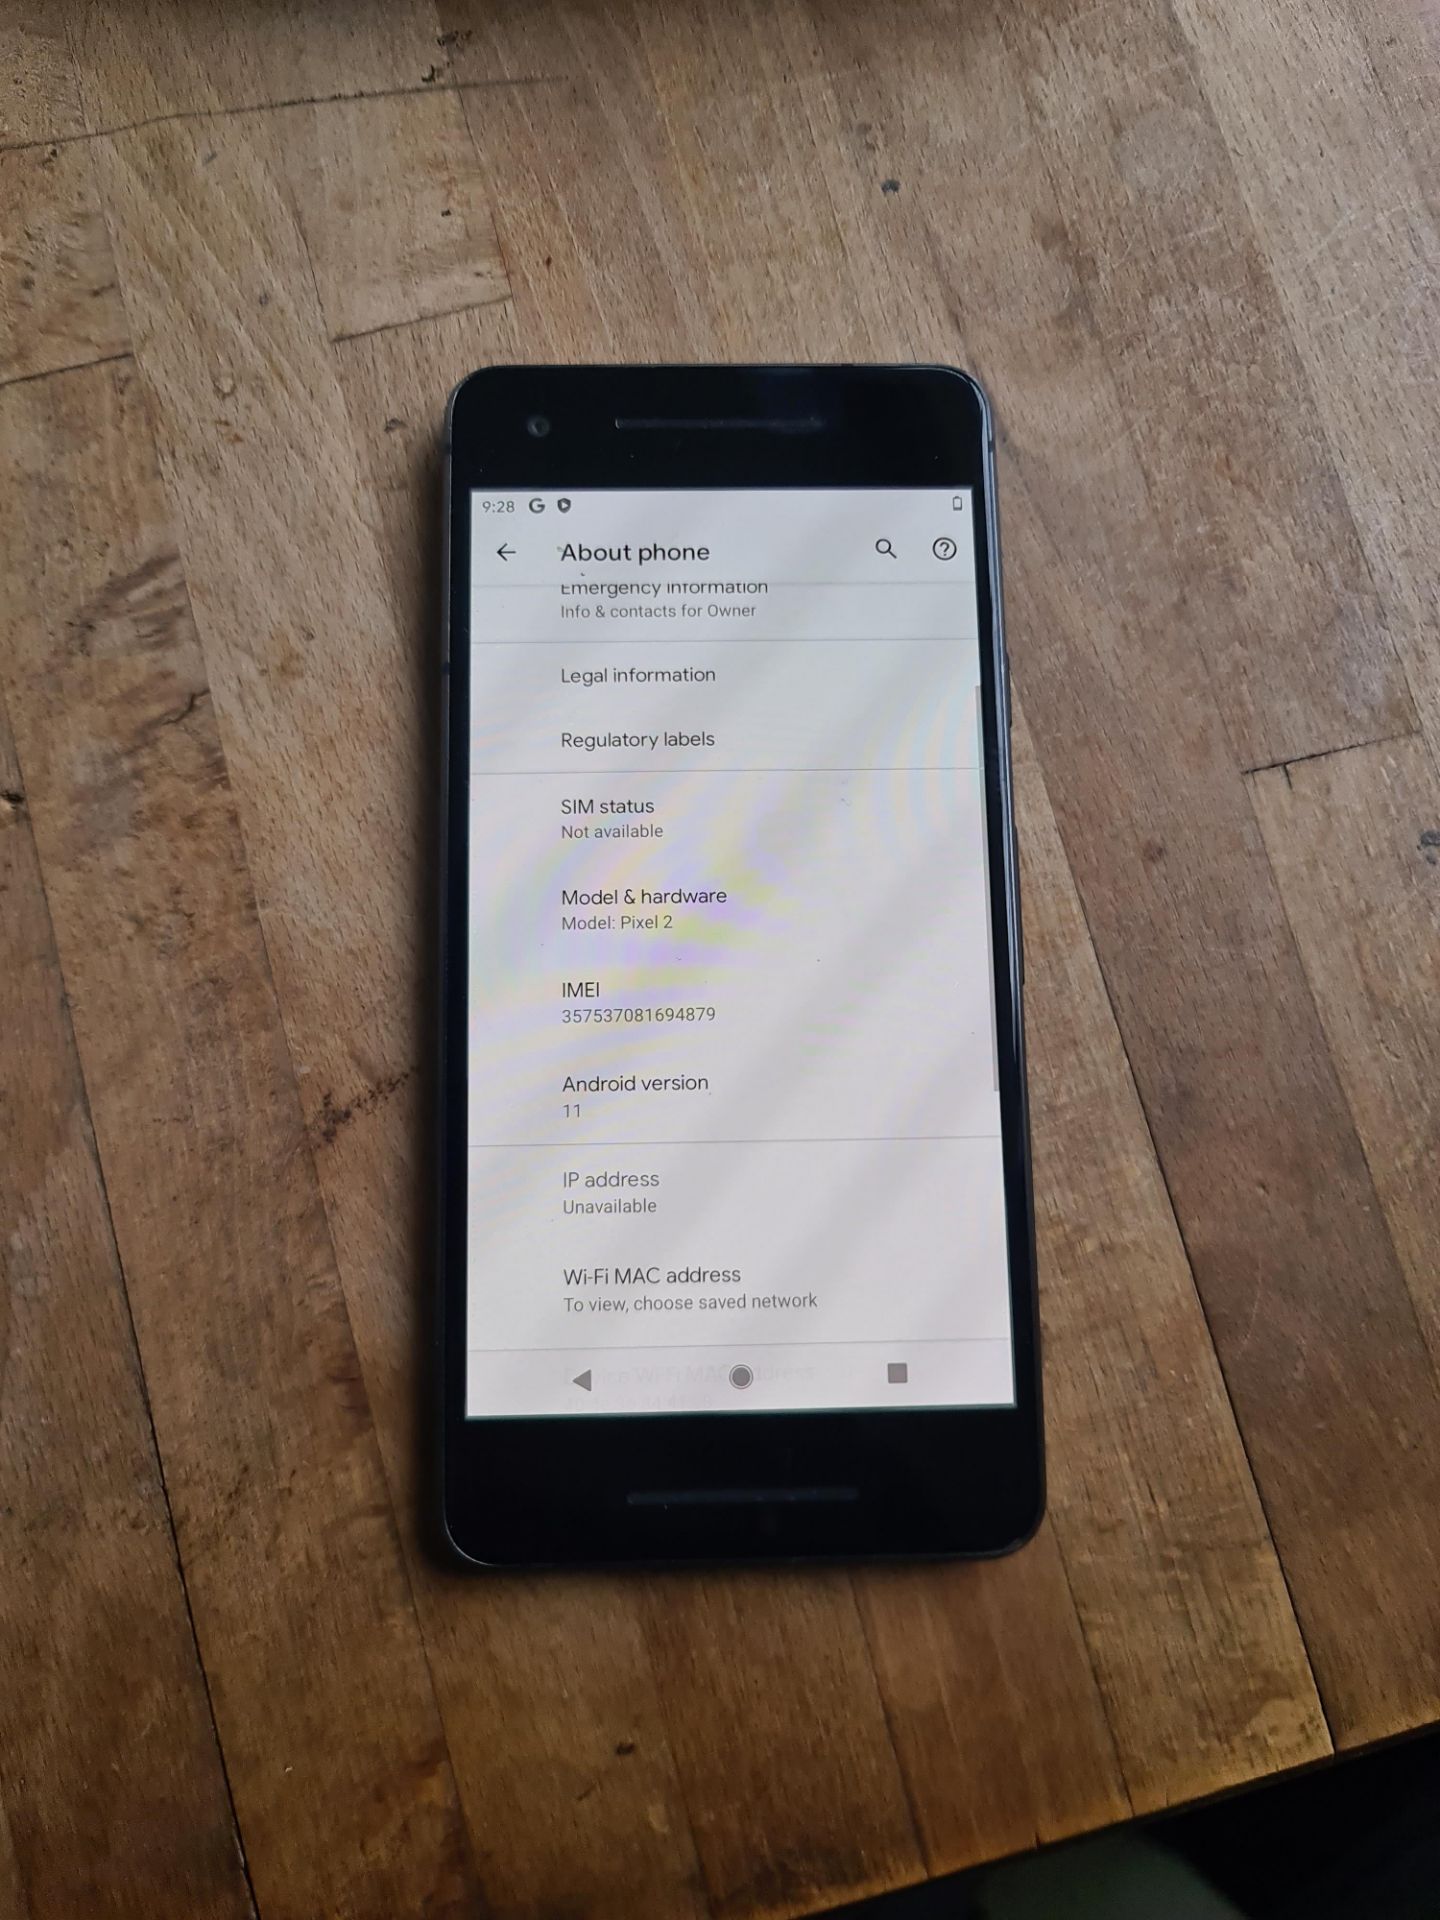 Google Pixel 2 mobile phone with box. - Image 4 of 11